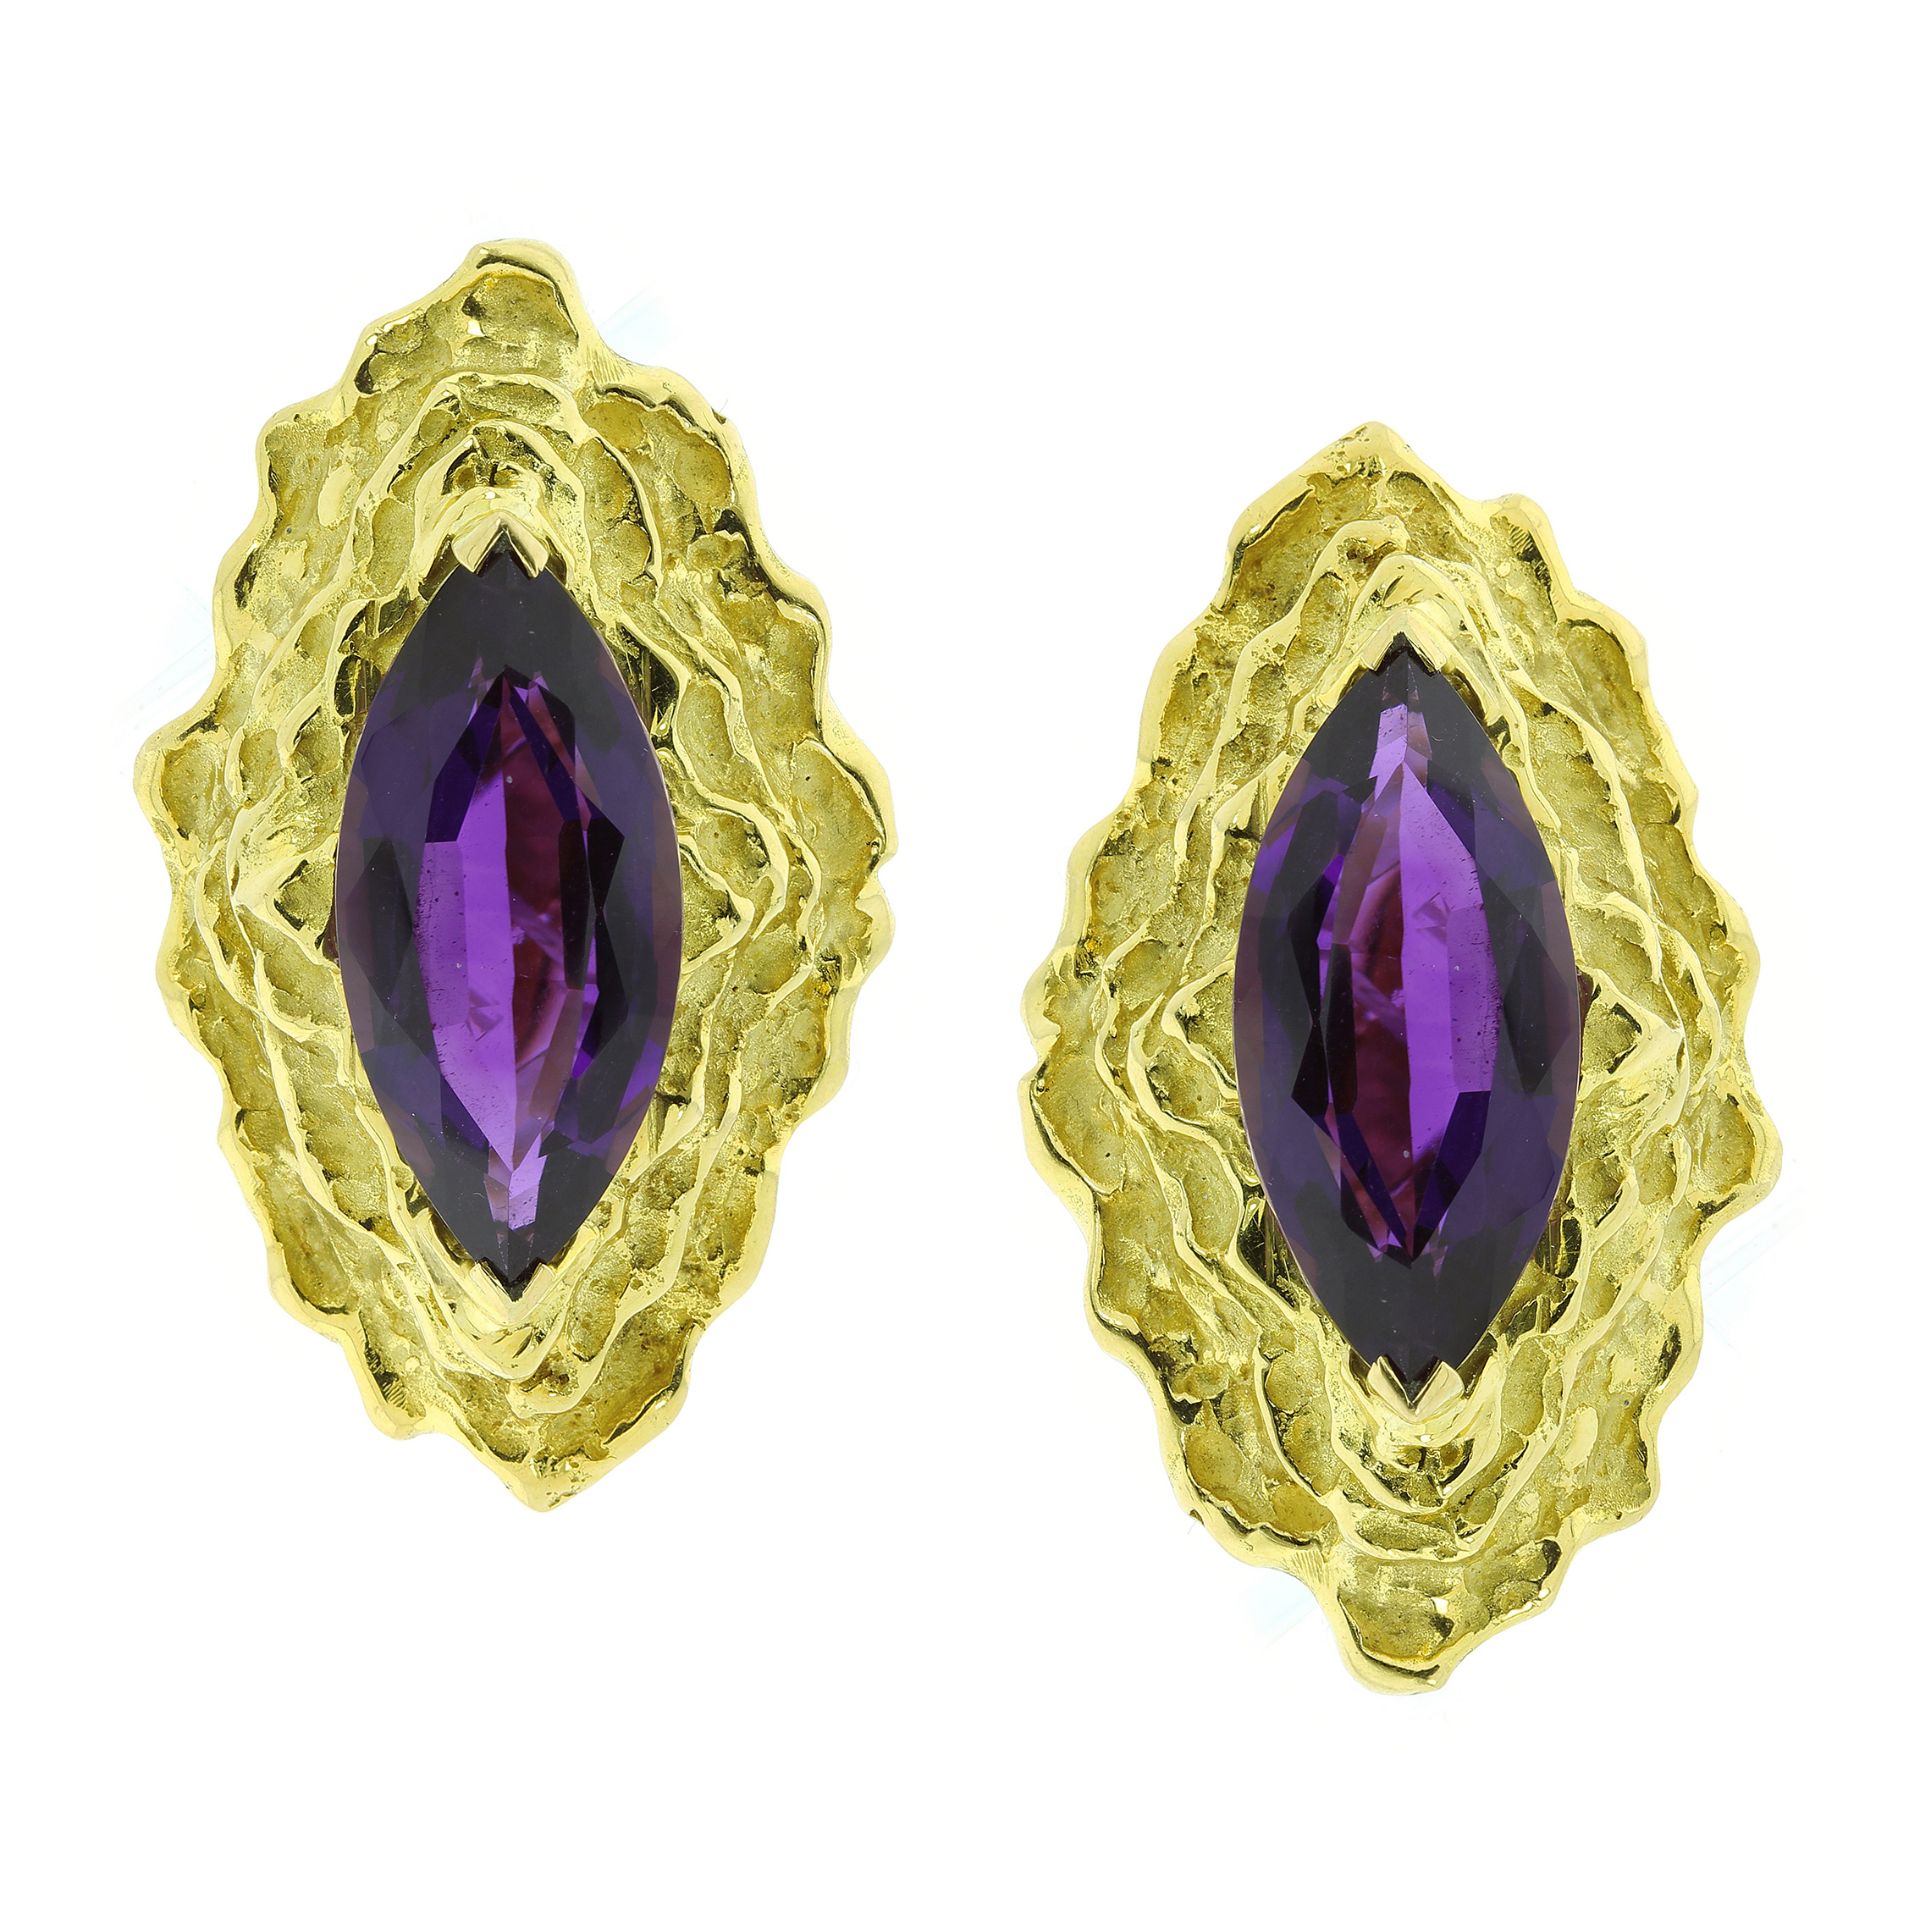 A PAIR OF AMETHYST CLIP EARRINGS CIRCA 1970 in high carat yellow gold each set with a large marquise